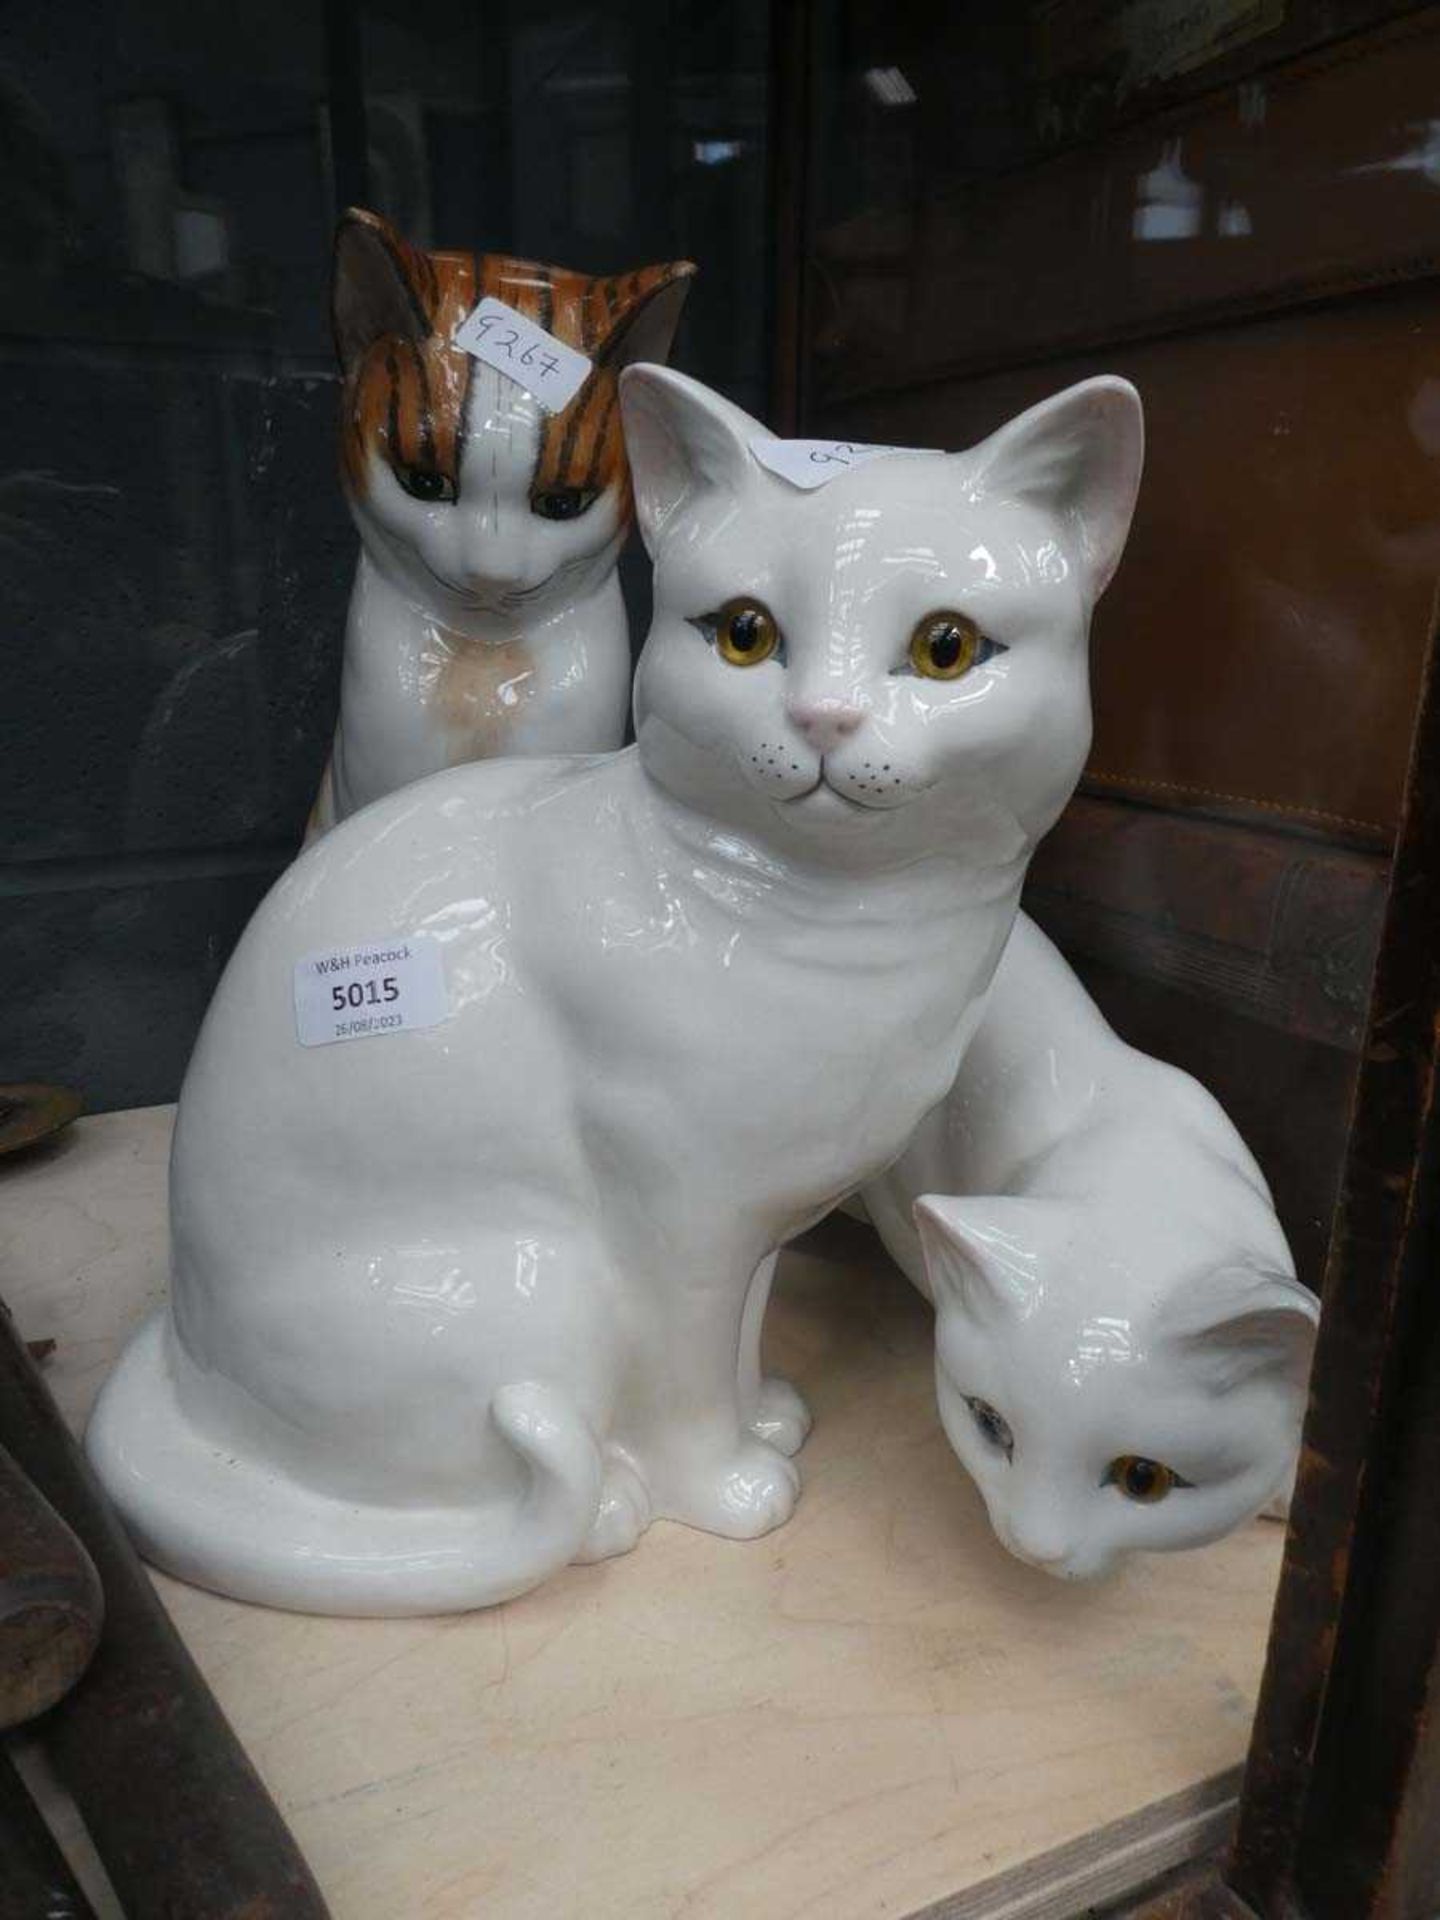 3 x Just Cats & Co Staffordshire large scale models of cats